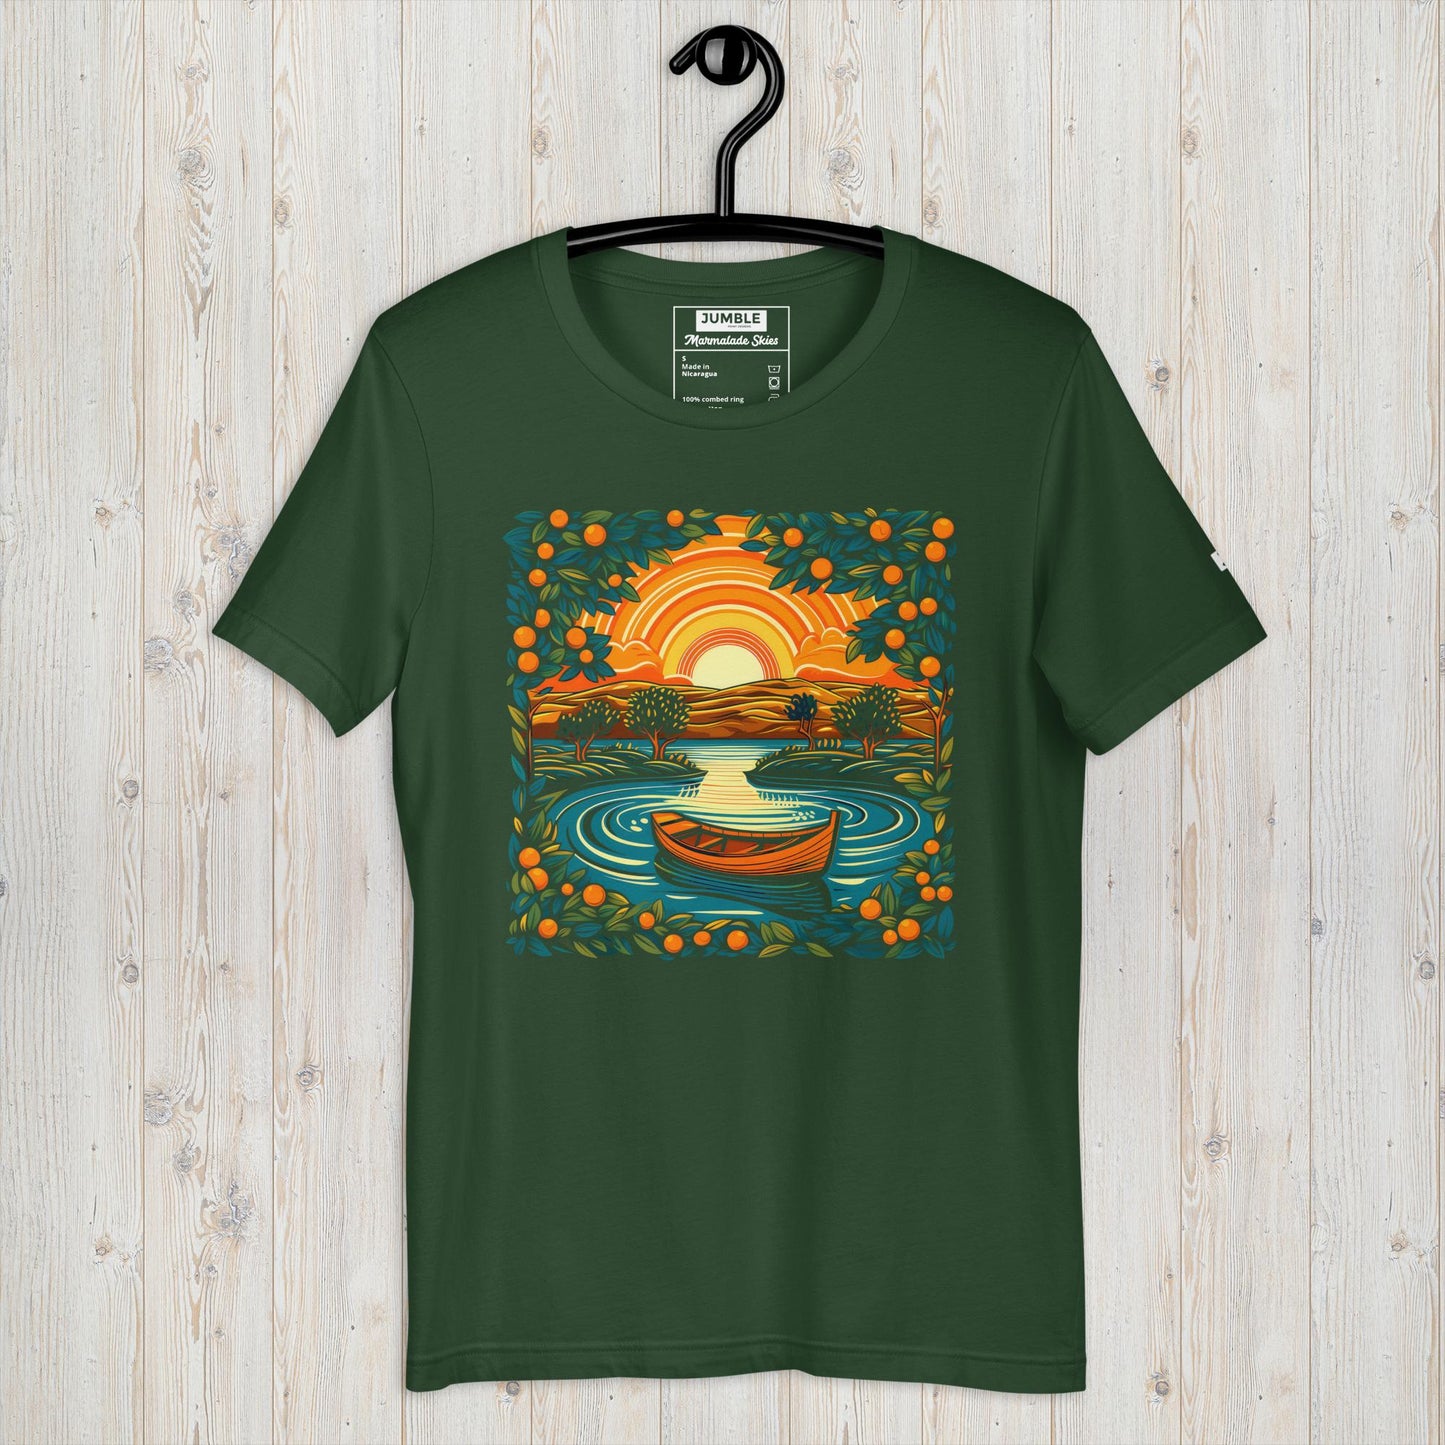 Marmalade Skies Unisex t-shirt, in forest. Displayed on hanger